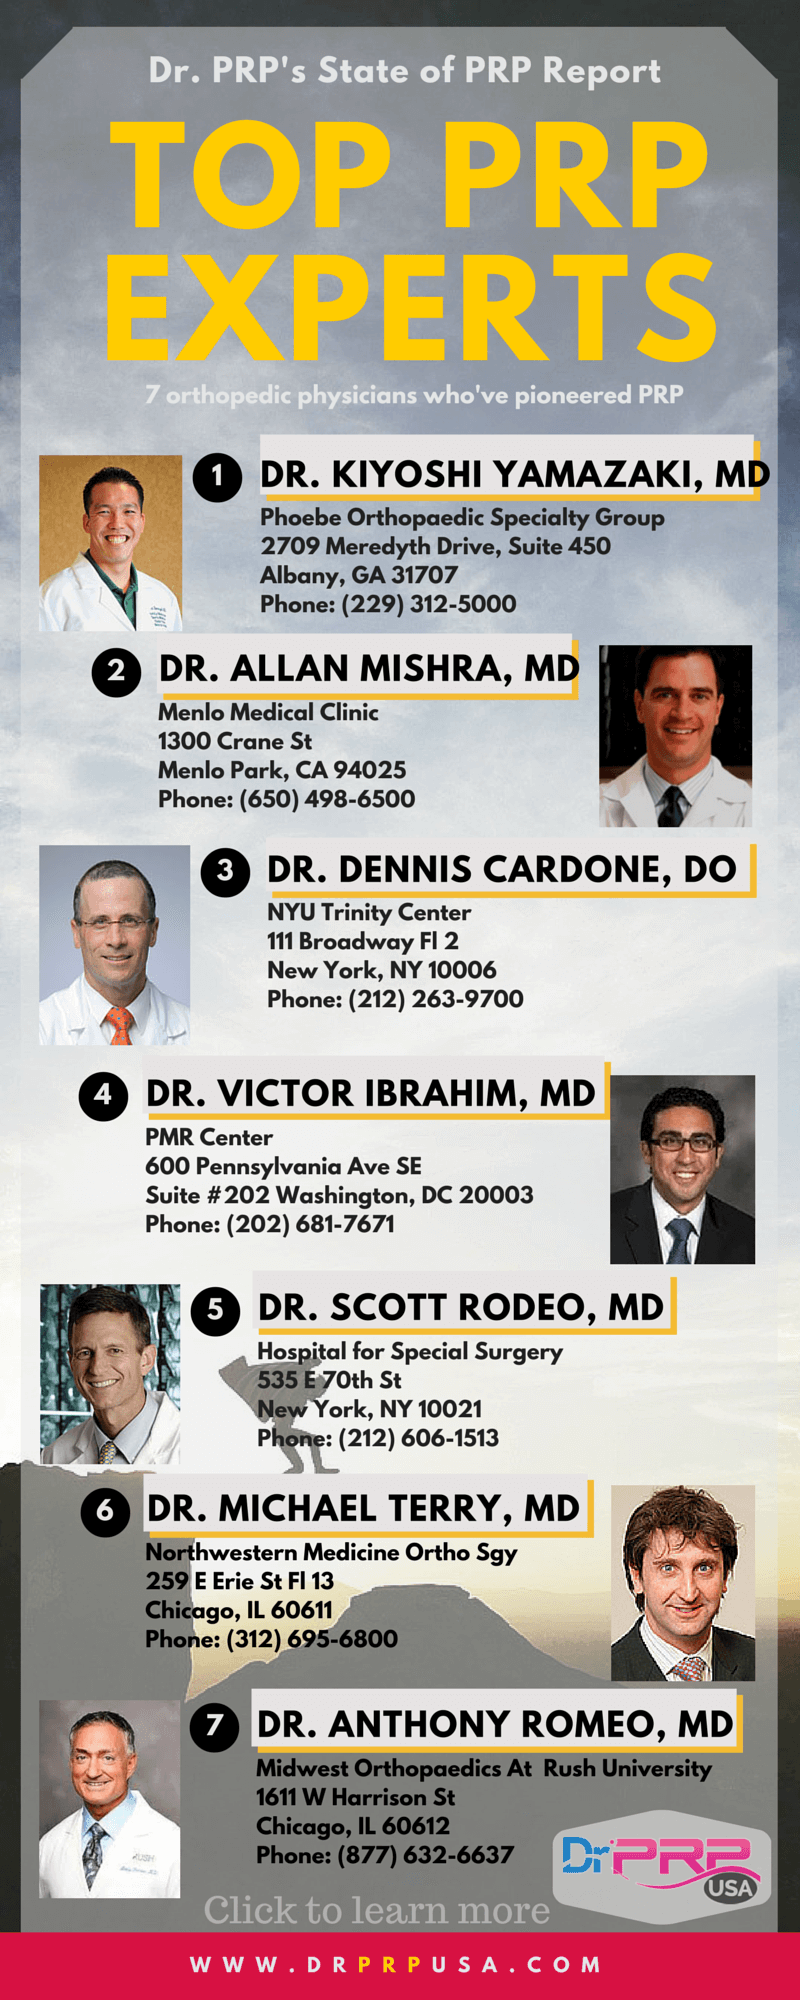 Doctors Who Pioneered PRP Treatments